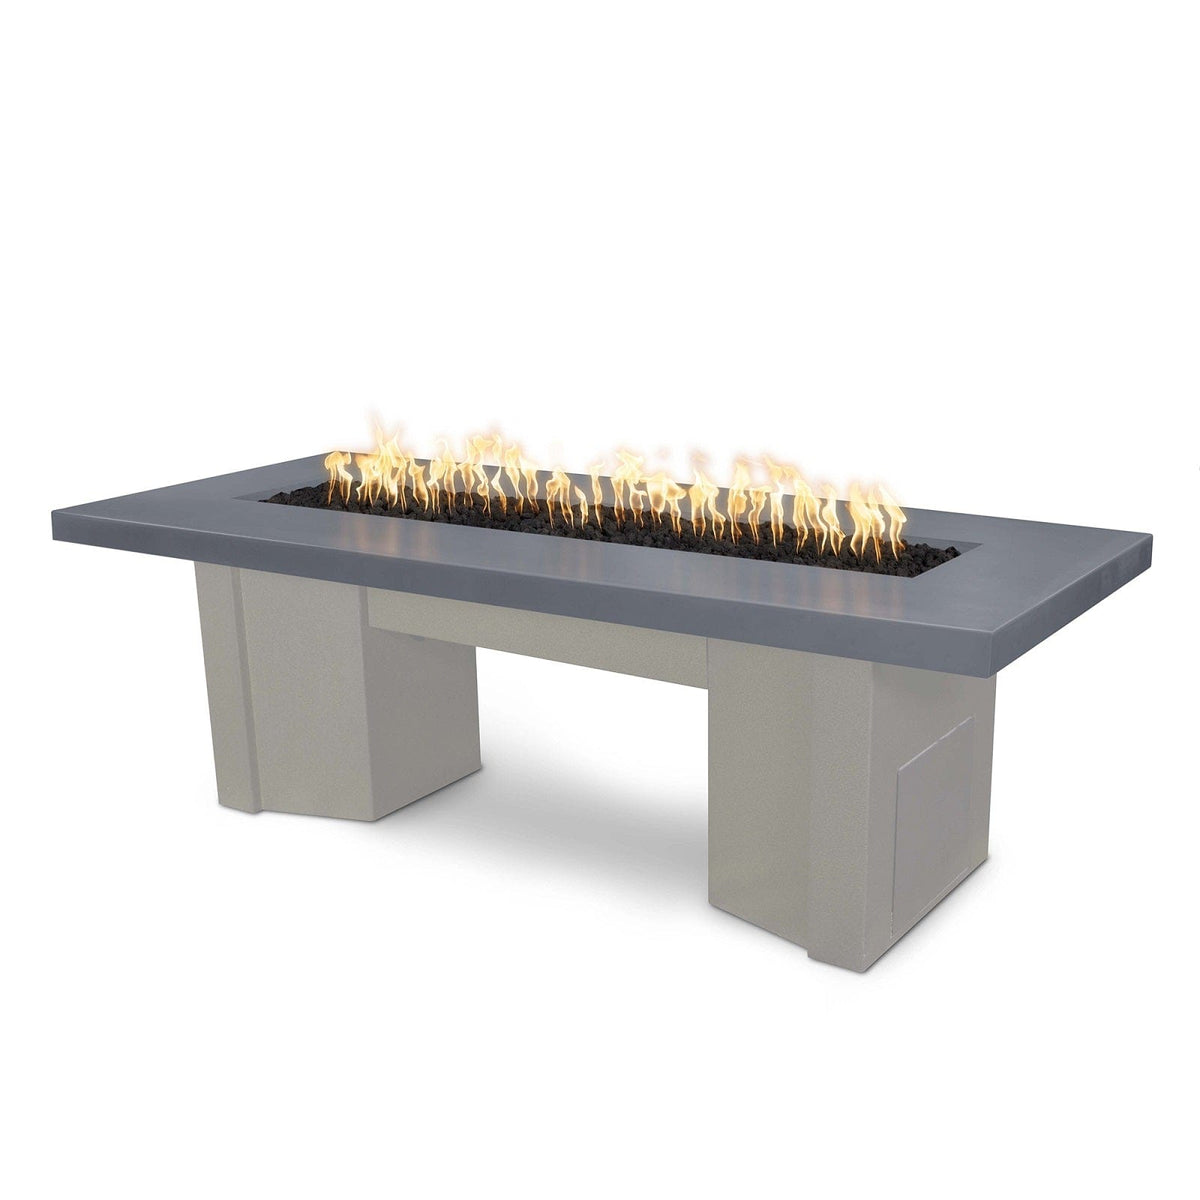 The Outdoor Plus Fire Features Gray (-GRY) / Pewter Powder Coated Steel (-PEW) The Outdoor Plus 78&quot; Alameda Fire Table Smooth Concrete in Natural Gas - Flame Sense System with Push Button Spark Igniter / OPT-ALMGFRC78FSEN-NG